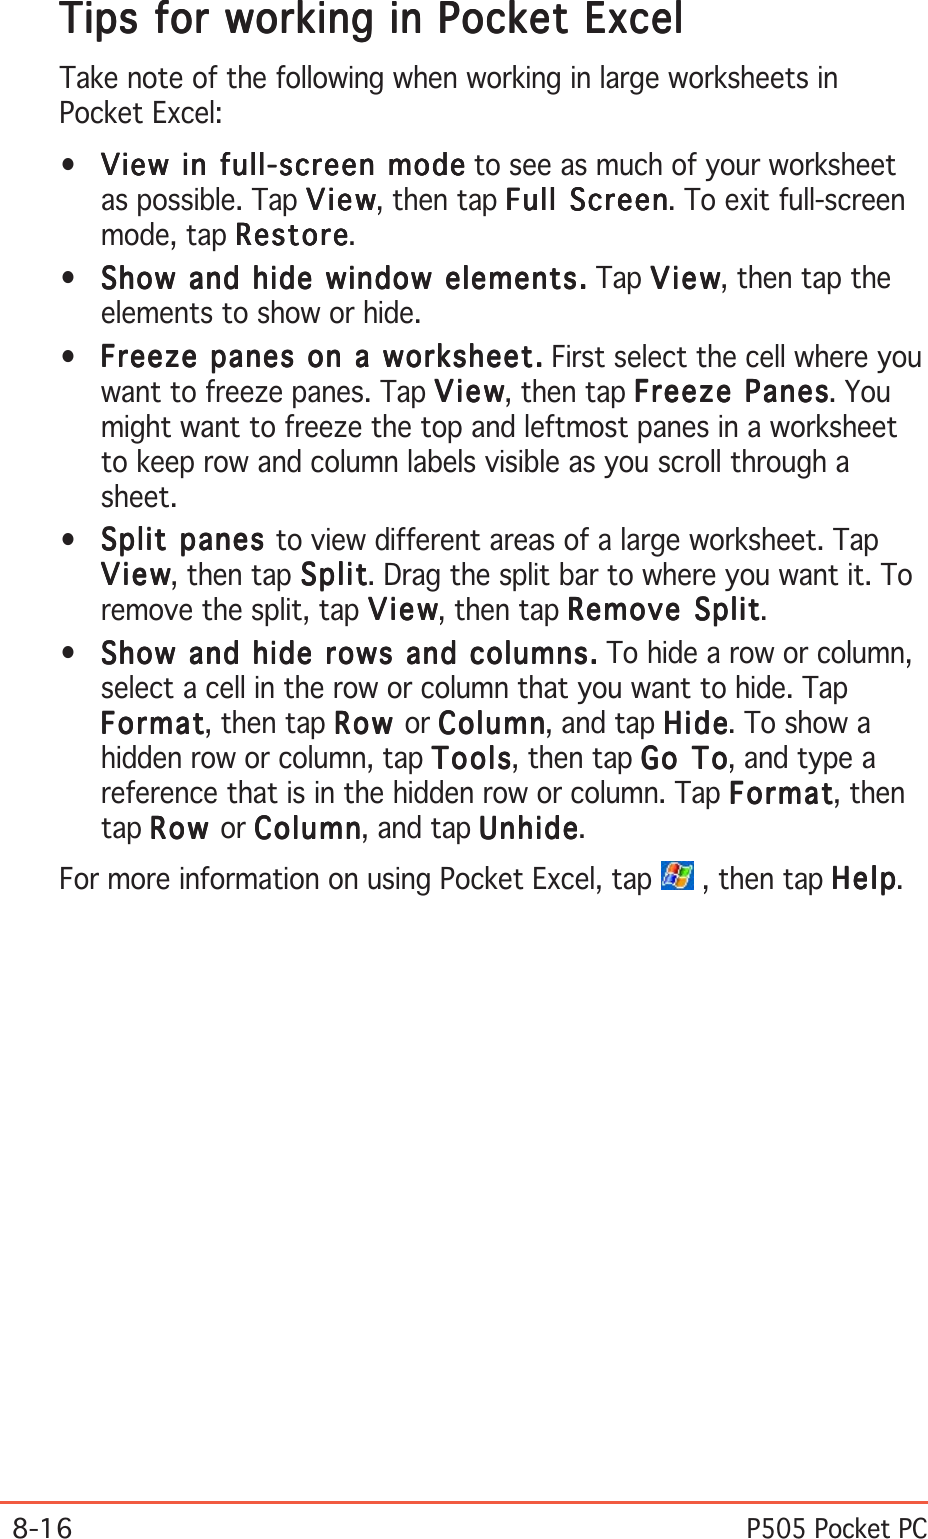 8-16P505 Pocket PCTips for working in Pocket ExcelTips for working in Pocket ExcelTips for working in Pocket ExcelTips for working in Pocket ExcelTips for working in Pocket ExcelTake note of the following when working in large worksheets inPocket Excel:•View in full-screen modeView in full-screen modeView in full-screen modeView in full-screen modeView in full-screen mode to see as much of your worksheetas possible. Tap ViewViewViewViewVi e w, then tap Full ScreenFull ScreenFull ScreenFull ScreenFull Screen. To exit full-screenmode, tap RestoreRestoreRestoreRestoreRestore.•Show and hide window elements.Show and hide window elements.Show and hide window elements.Show and hide window elements.Show and hide window elements. Tap ViewViewViewViewVi e w, then tap theelements to show or hide.•Freeze panes on a worksheet.Freeze panes on a worksheet.Freeze panes on a worksheet.Freeze panes on a worksheet.Freeze panes on a worksheet. First select the cell where youwant to freeze panes. Tap ViewViewViewViewVi e w, then tap Freeze PanesFreeze PanesFreeze PanesFreeze PanesFreeze Panes. Youmight want to freeze the top and leftmost panes in a worksheetto keep row and column labels visible as you scroll through asheet.•Split panes Split panes Split panes Split panes Split panes to view different areas of a large worksheet. TapViewViewViewViewVi e w, then tap SplitSplitSplitSplitSp lit. Drag the split bar to where you want it. Toremove the split, tap ViewViewViewViewVi e w, then tap Remove SplitRemove SplitRemove SplitRemove SplitRemove Split.•Show and hide rows and columns.Show and hide rows and columns.Show and hide rows and columns.Show and hide rows and columns.Show and hide rows and columns. To hide a row or column,select a cell in the row or column that you want to hide. TapFormatFormatFormatFormatFormat, then tap RowRowRowRowRow or ColumnColumnColumnColumnColu mn, and tap HideHideHideHideHide. To show ahidden row or column, tap ToolsToolsToolsToolsTo ols, then tap Go ToGo ToGo ToGo ToGo  T o, and type areference that is in the hidden row or column. Tap FormatFormatFormatFormatFormat, thentap RowRowRowRowRow or ColumnColumnColumnColumnColu mn, and tap UnhideUnhideUnhideUnhideUnhide.For more information on using Pocket Excel, tap   , then tap HelpHelpHelpHelpHelp.